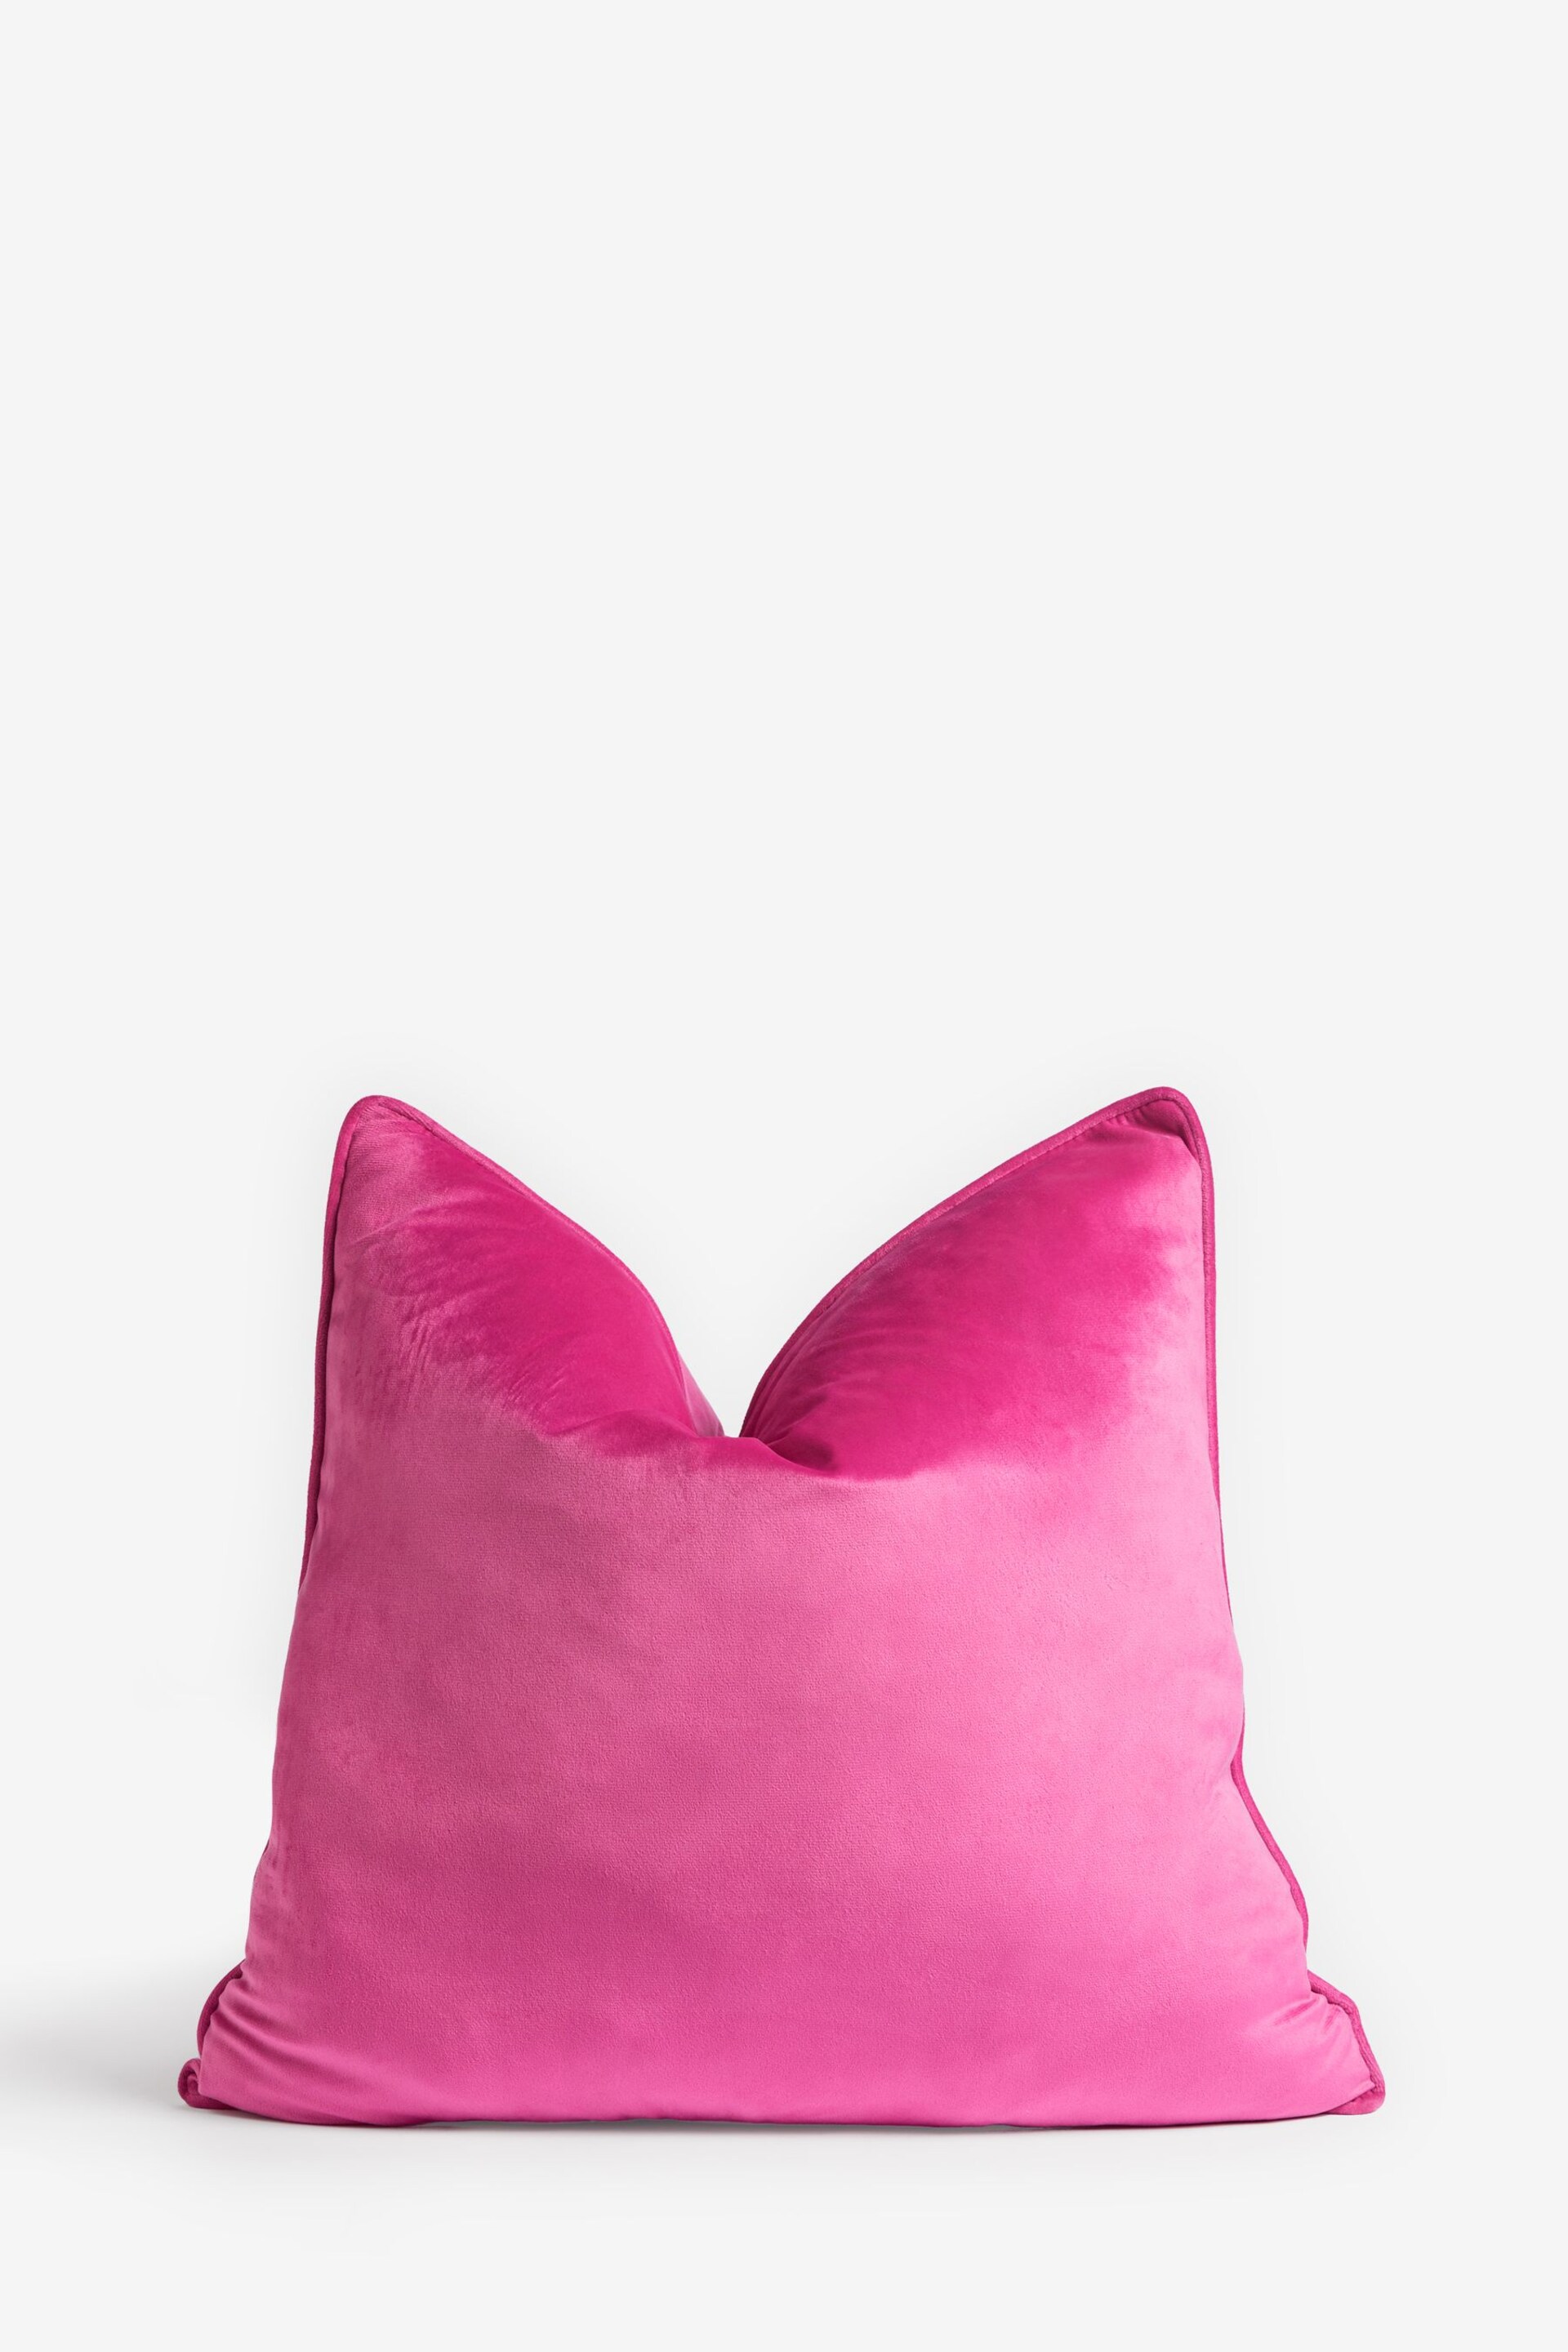 Bright Pink 59 x 59cm Matte Velvet Feather Filled Cushion - Image 2 of 2